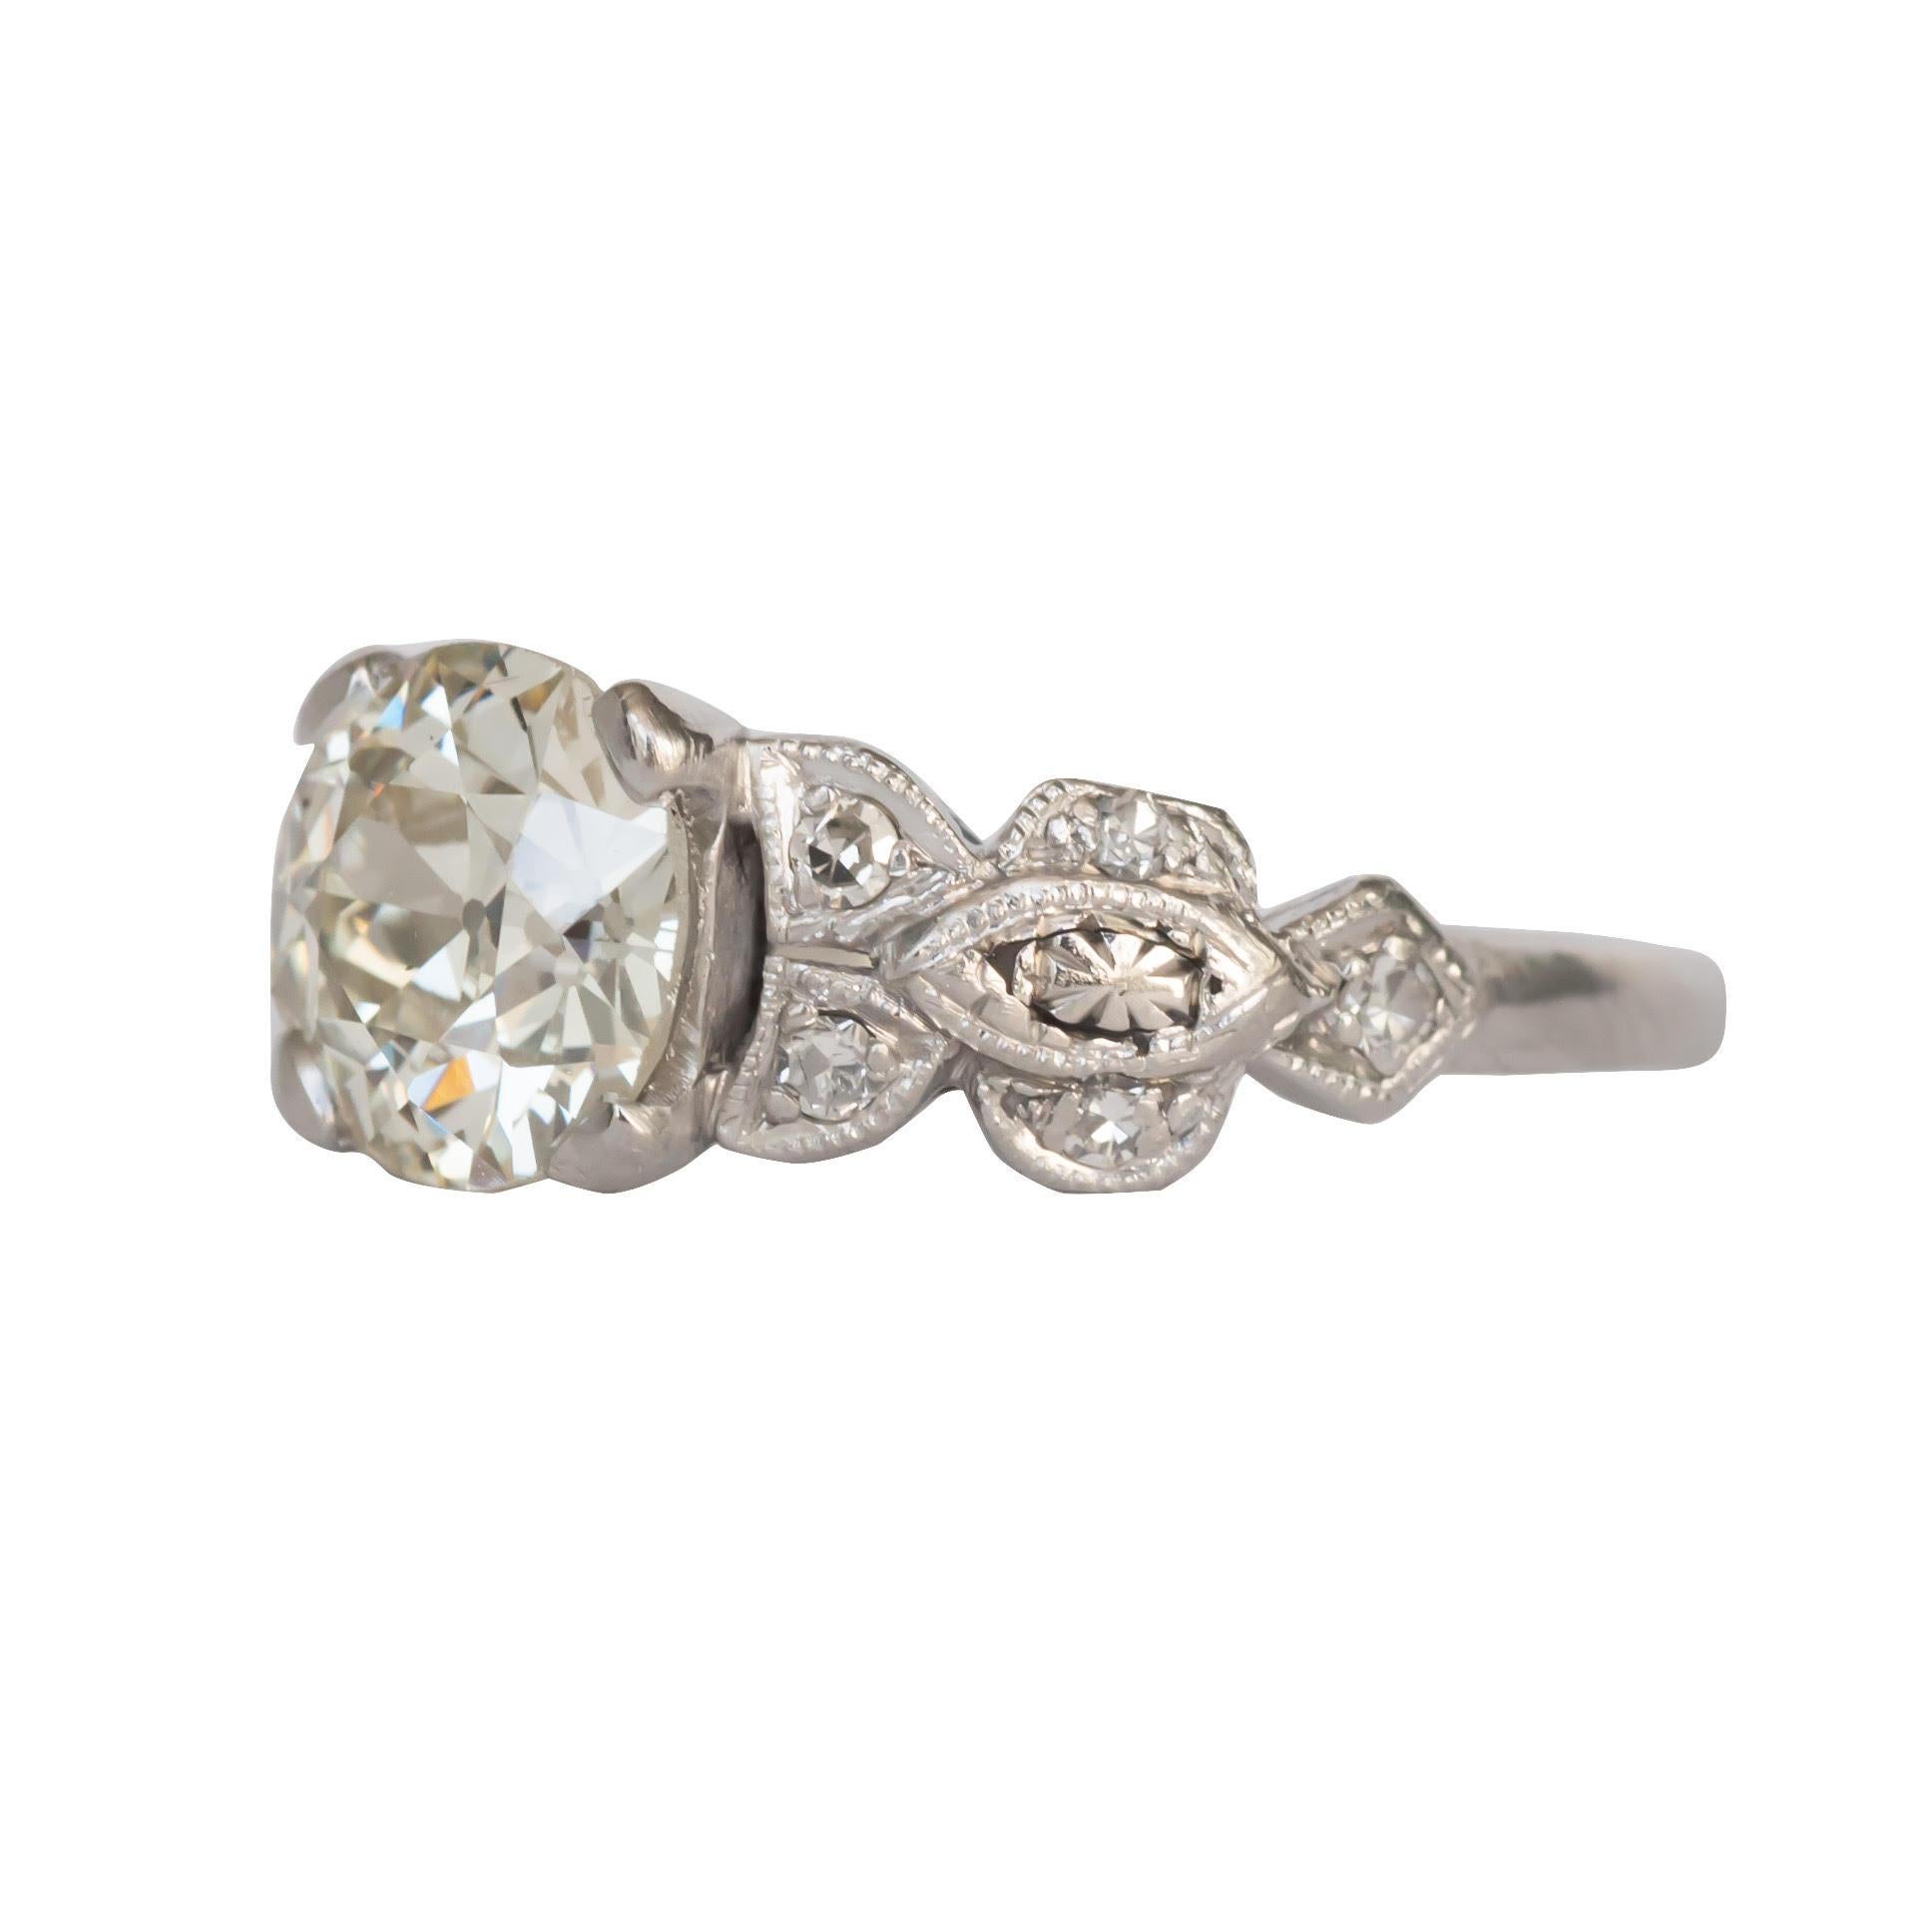 Here we have an beautiful example of an Art Deco era engagement ring! This genuine 1920's ring features a stunning 1.27 Carat Old European cut diamond set beautifully in a simple yet elegant platinum ring. The beautifully crafted platinum ring is